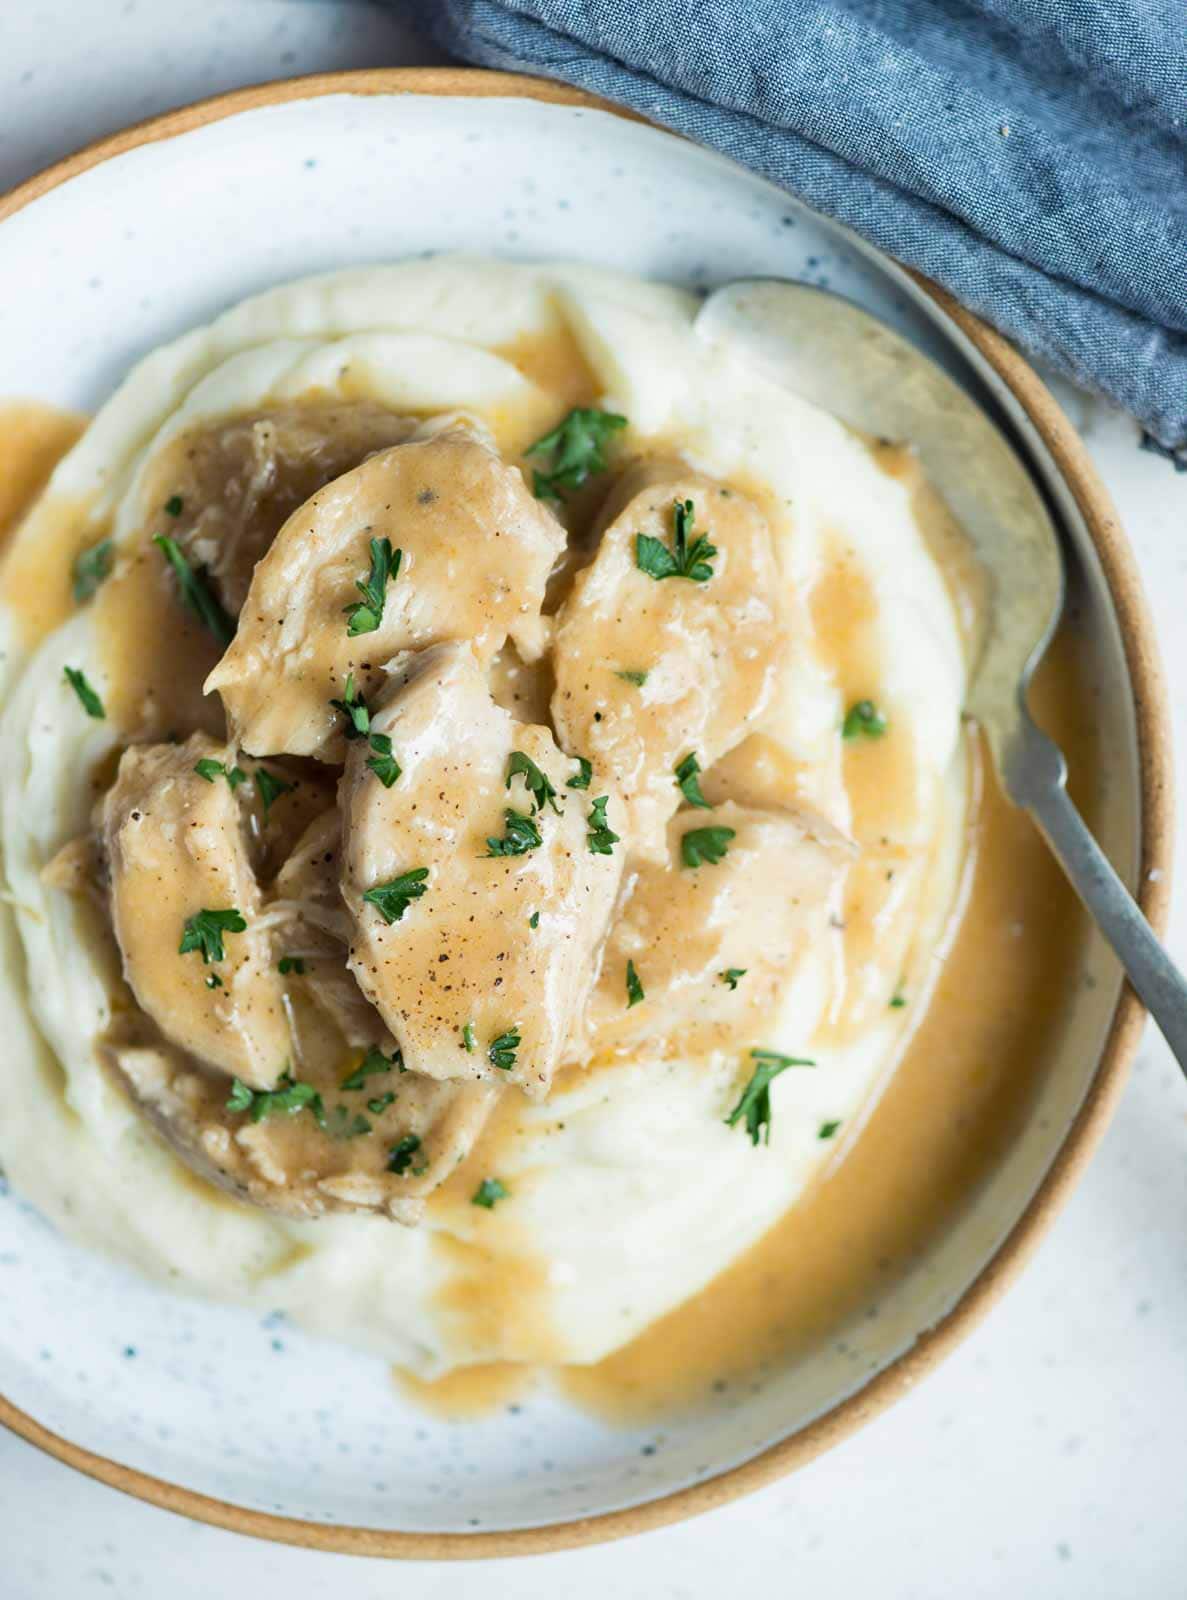 Instant Pot Chicken and Gravy - The flavours of kitchen